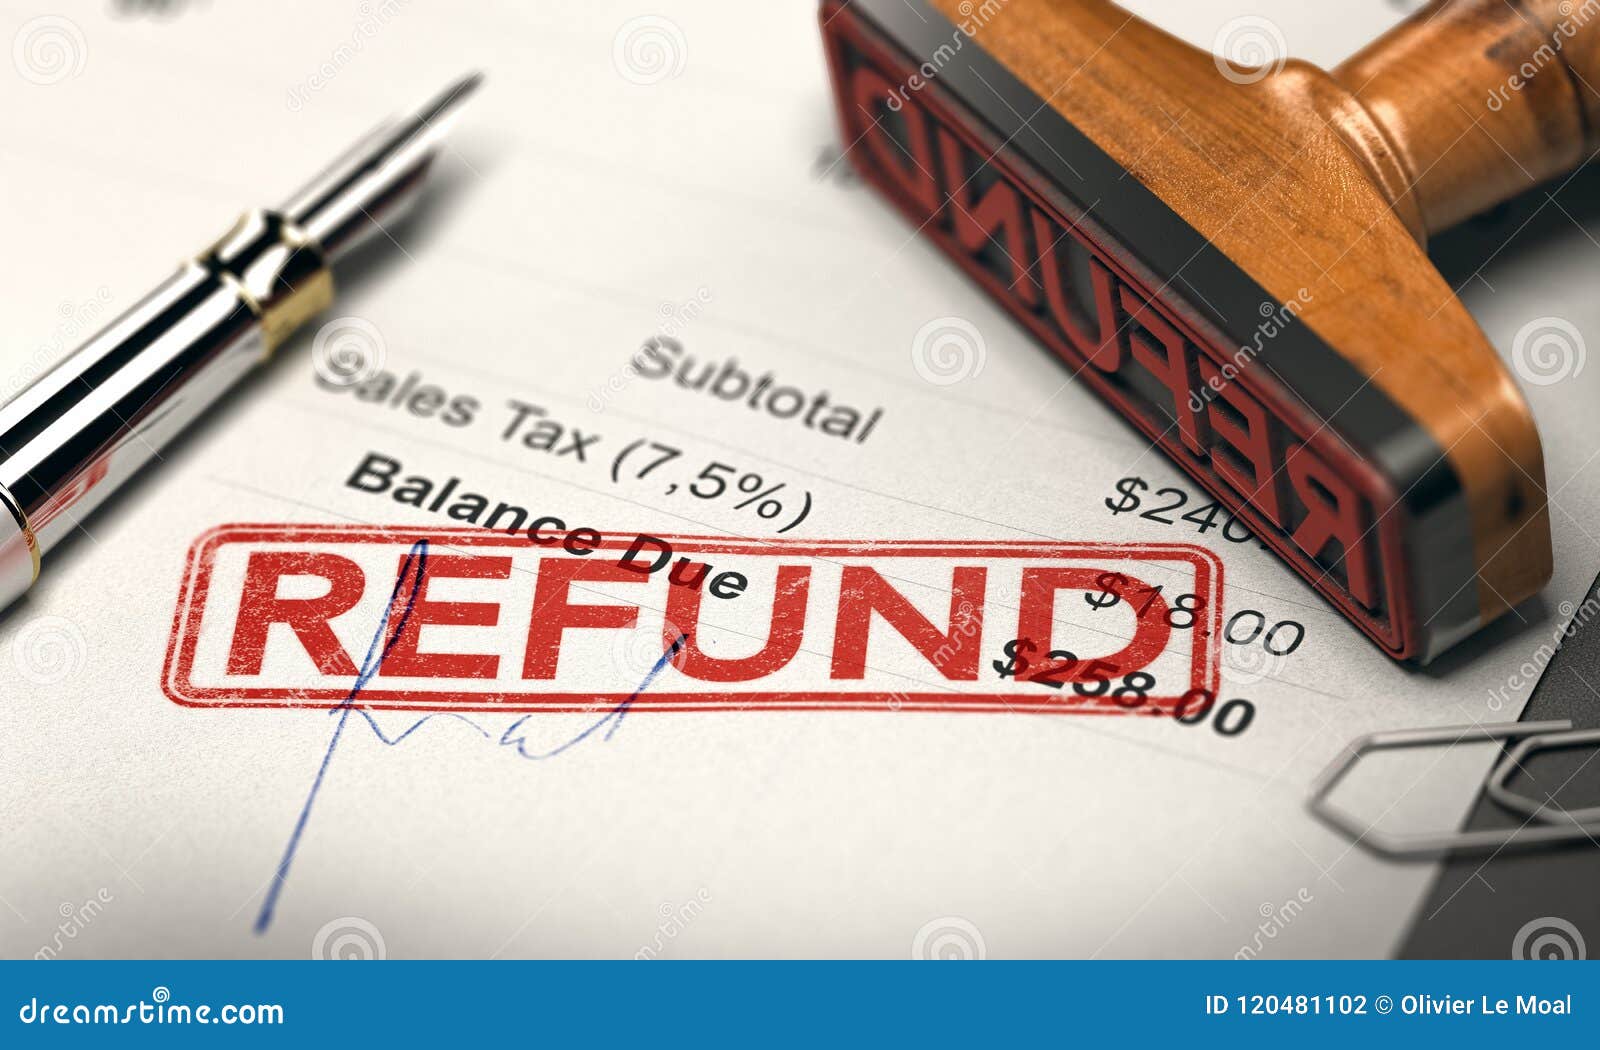 refundment-cartoons-illustrations-vector-stock-images-22-pictures